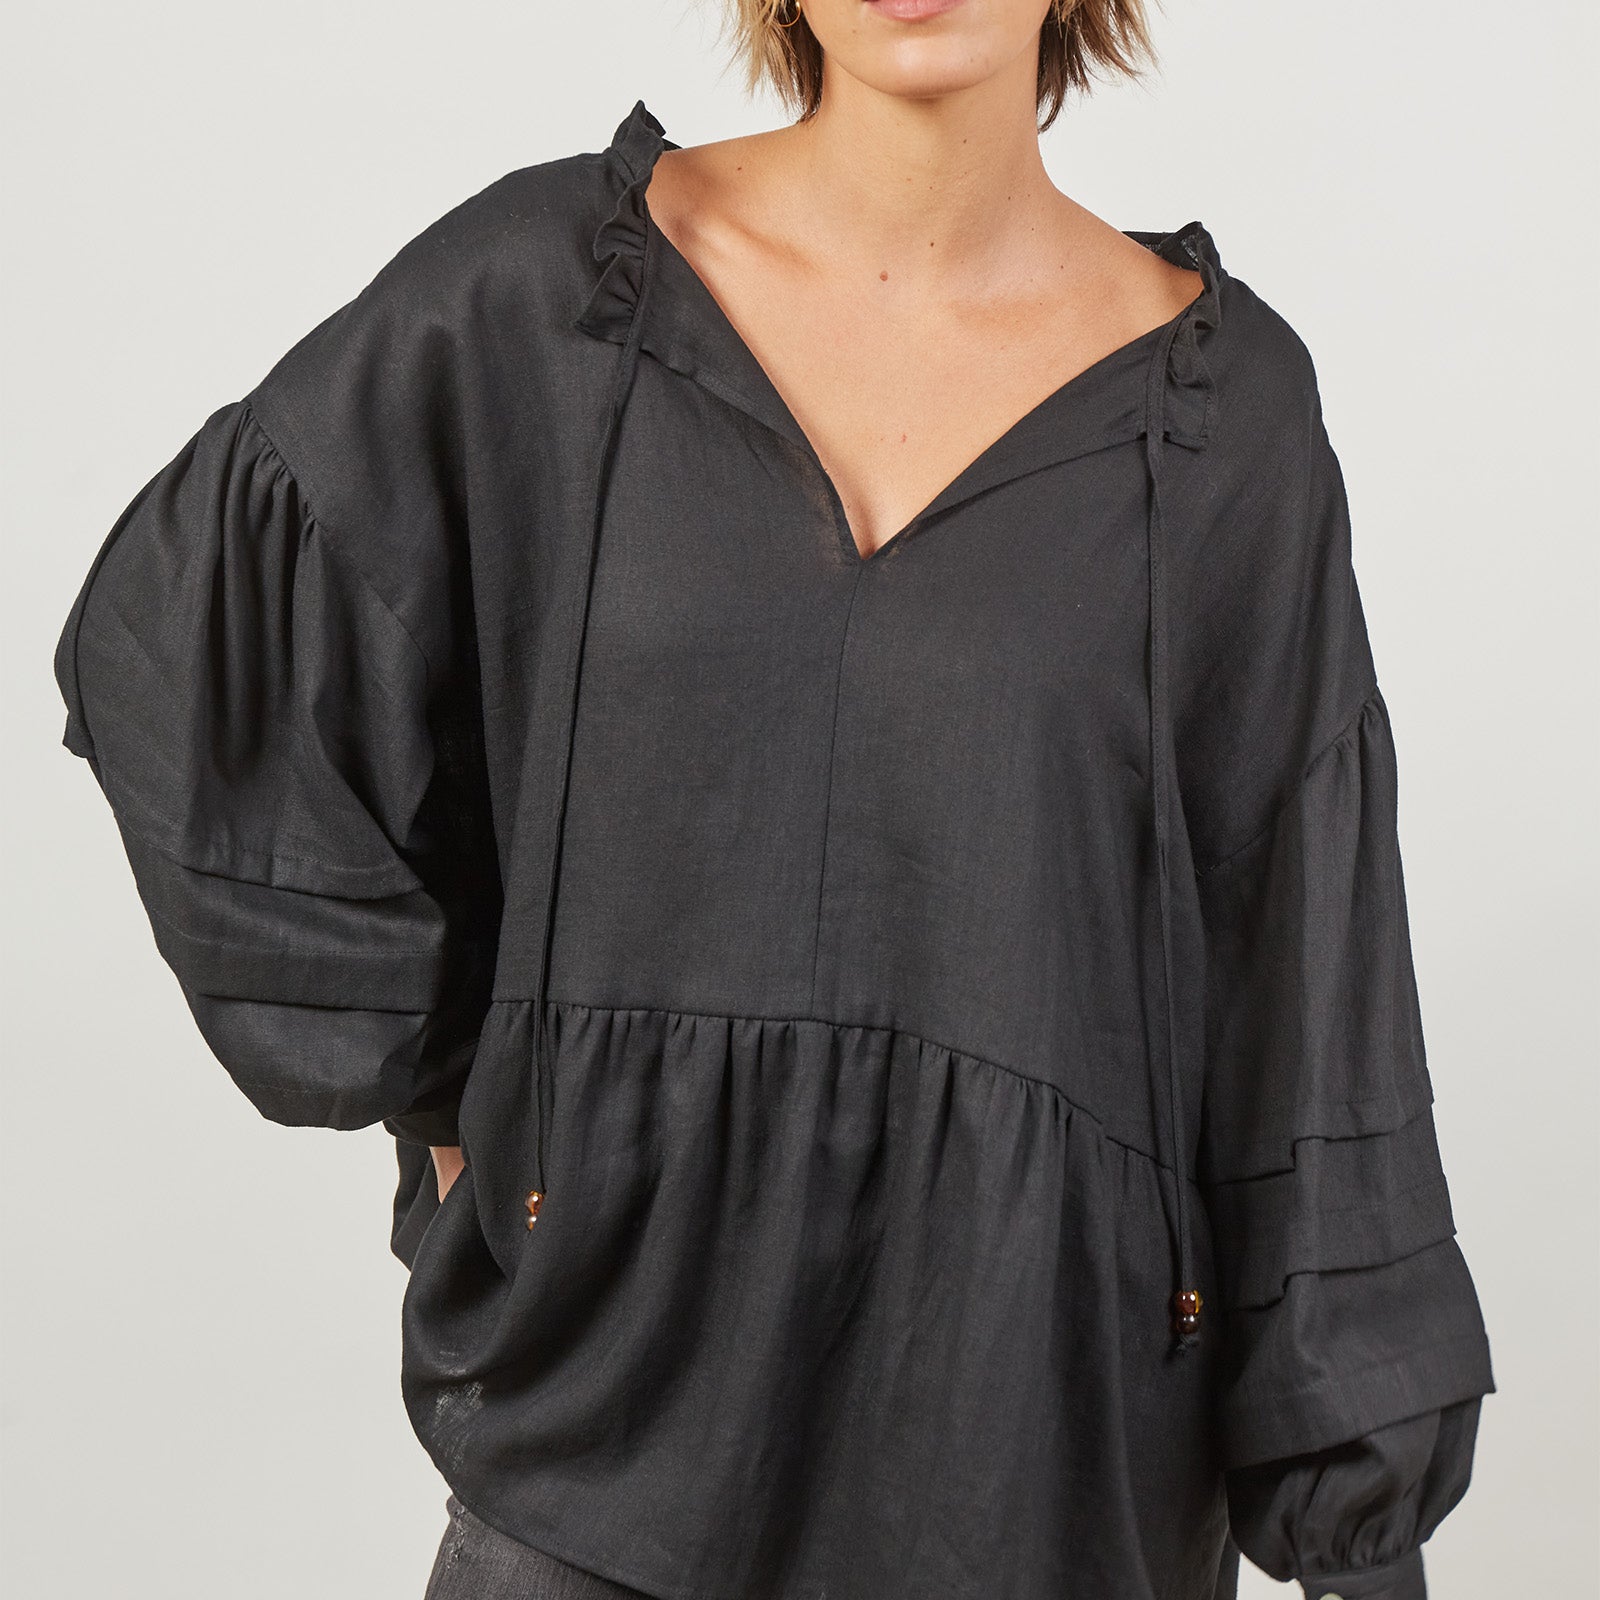 Panorama Relax Top - Onyx - Isle of Mine Clothing - Top L/S One Size